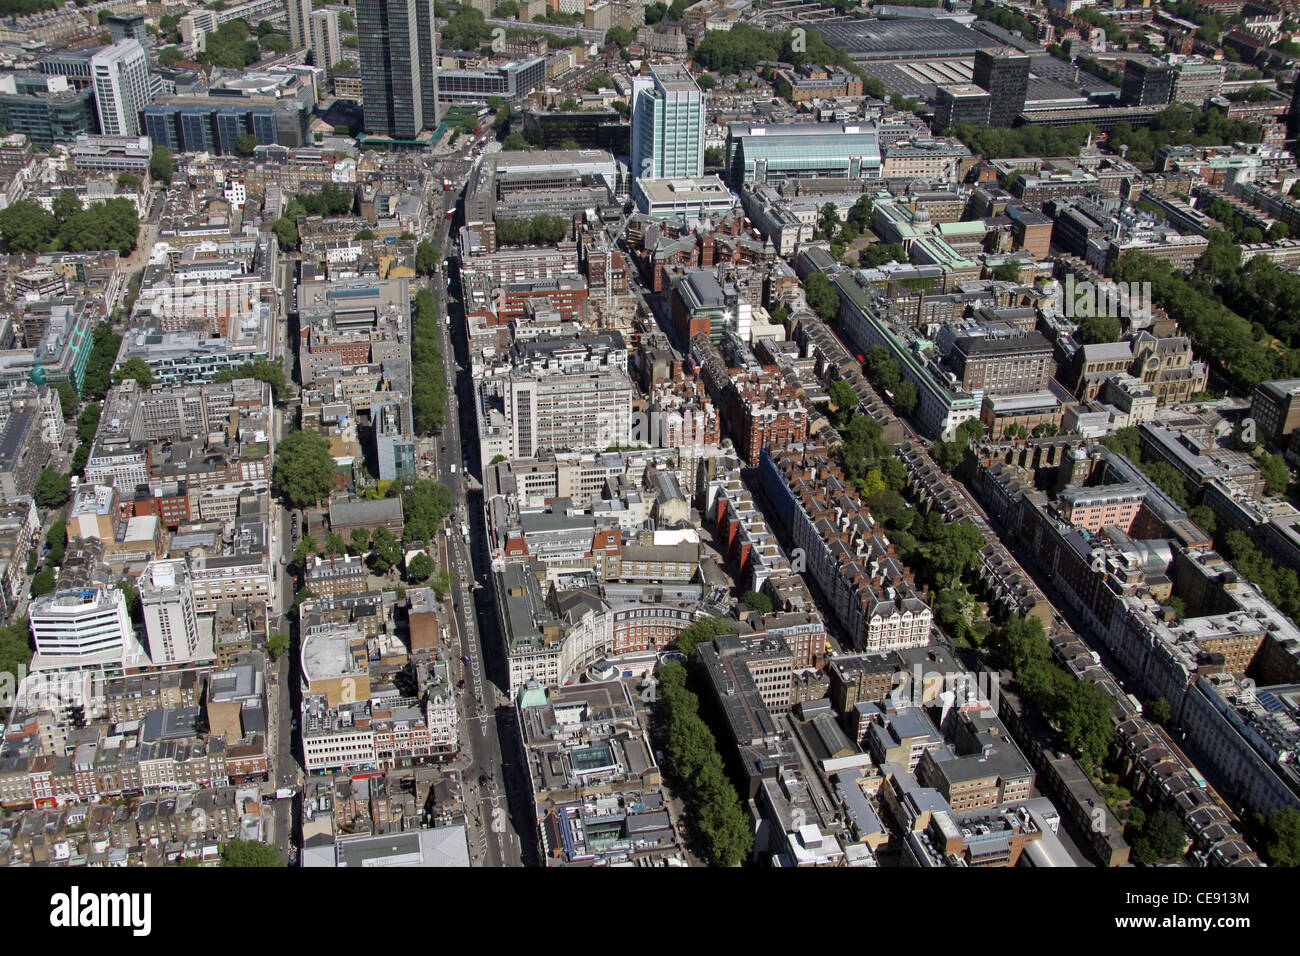 Aerial image the Bloomsbury area of London looking North up Tottenham Court Road & Gower Street from Goodge Street Station, London W1 Stock Photo